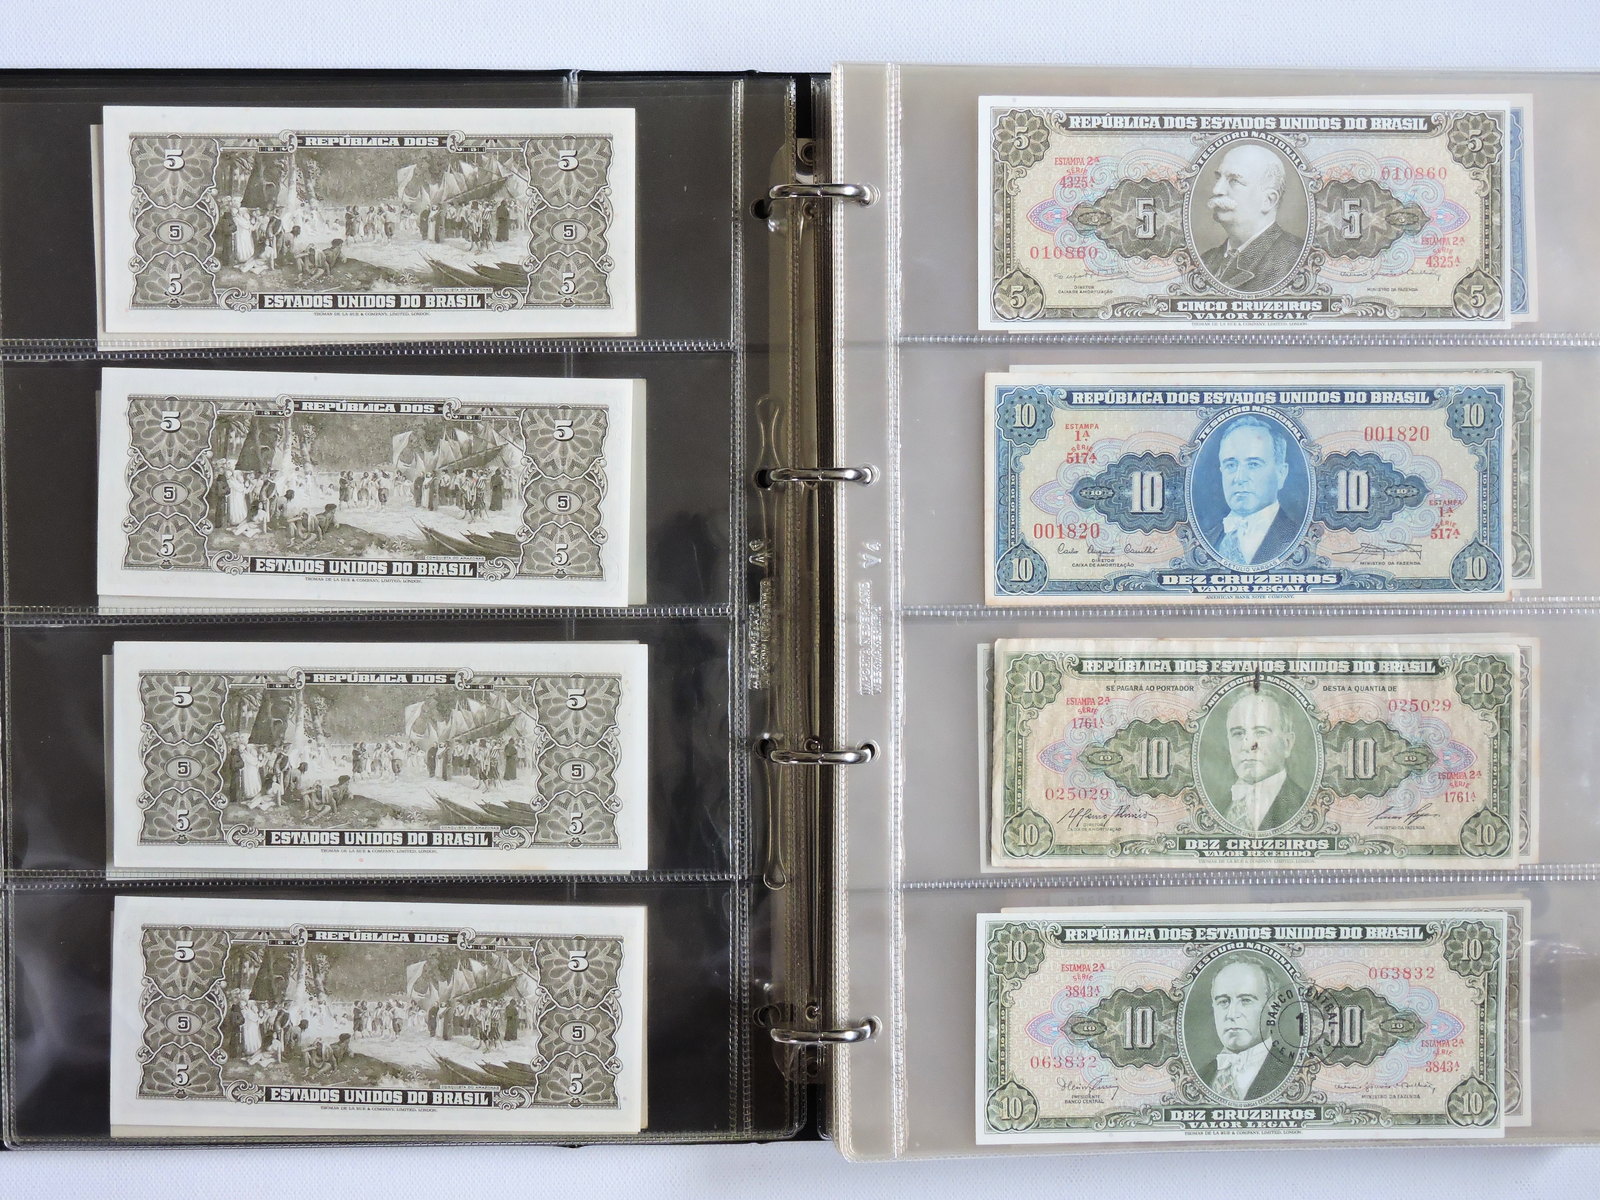 Banknotes, Brazil and Argentina
, page:4, item:1